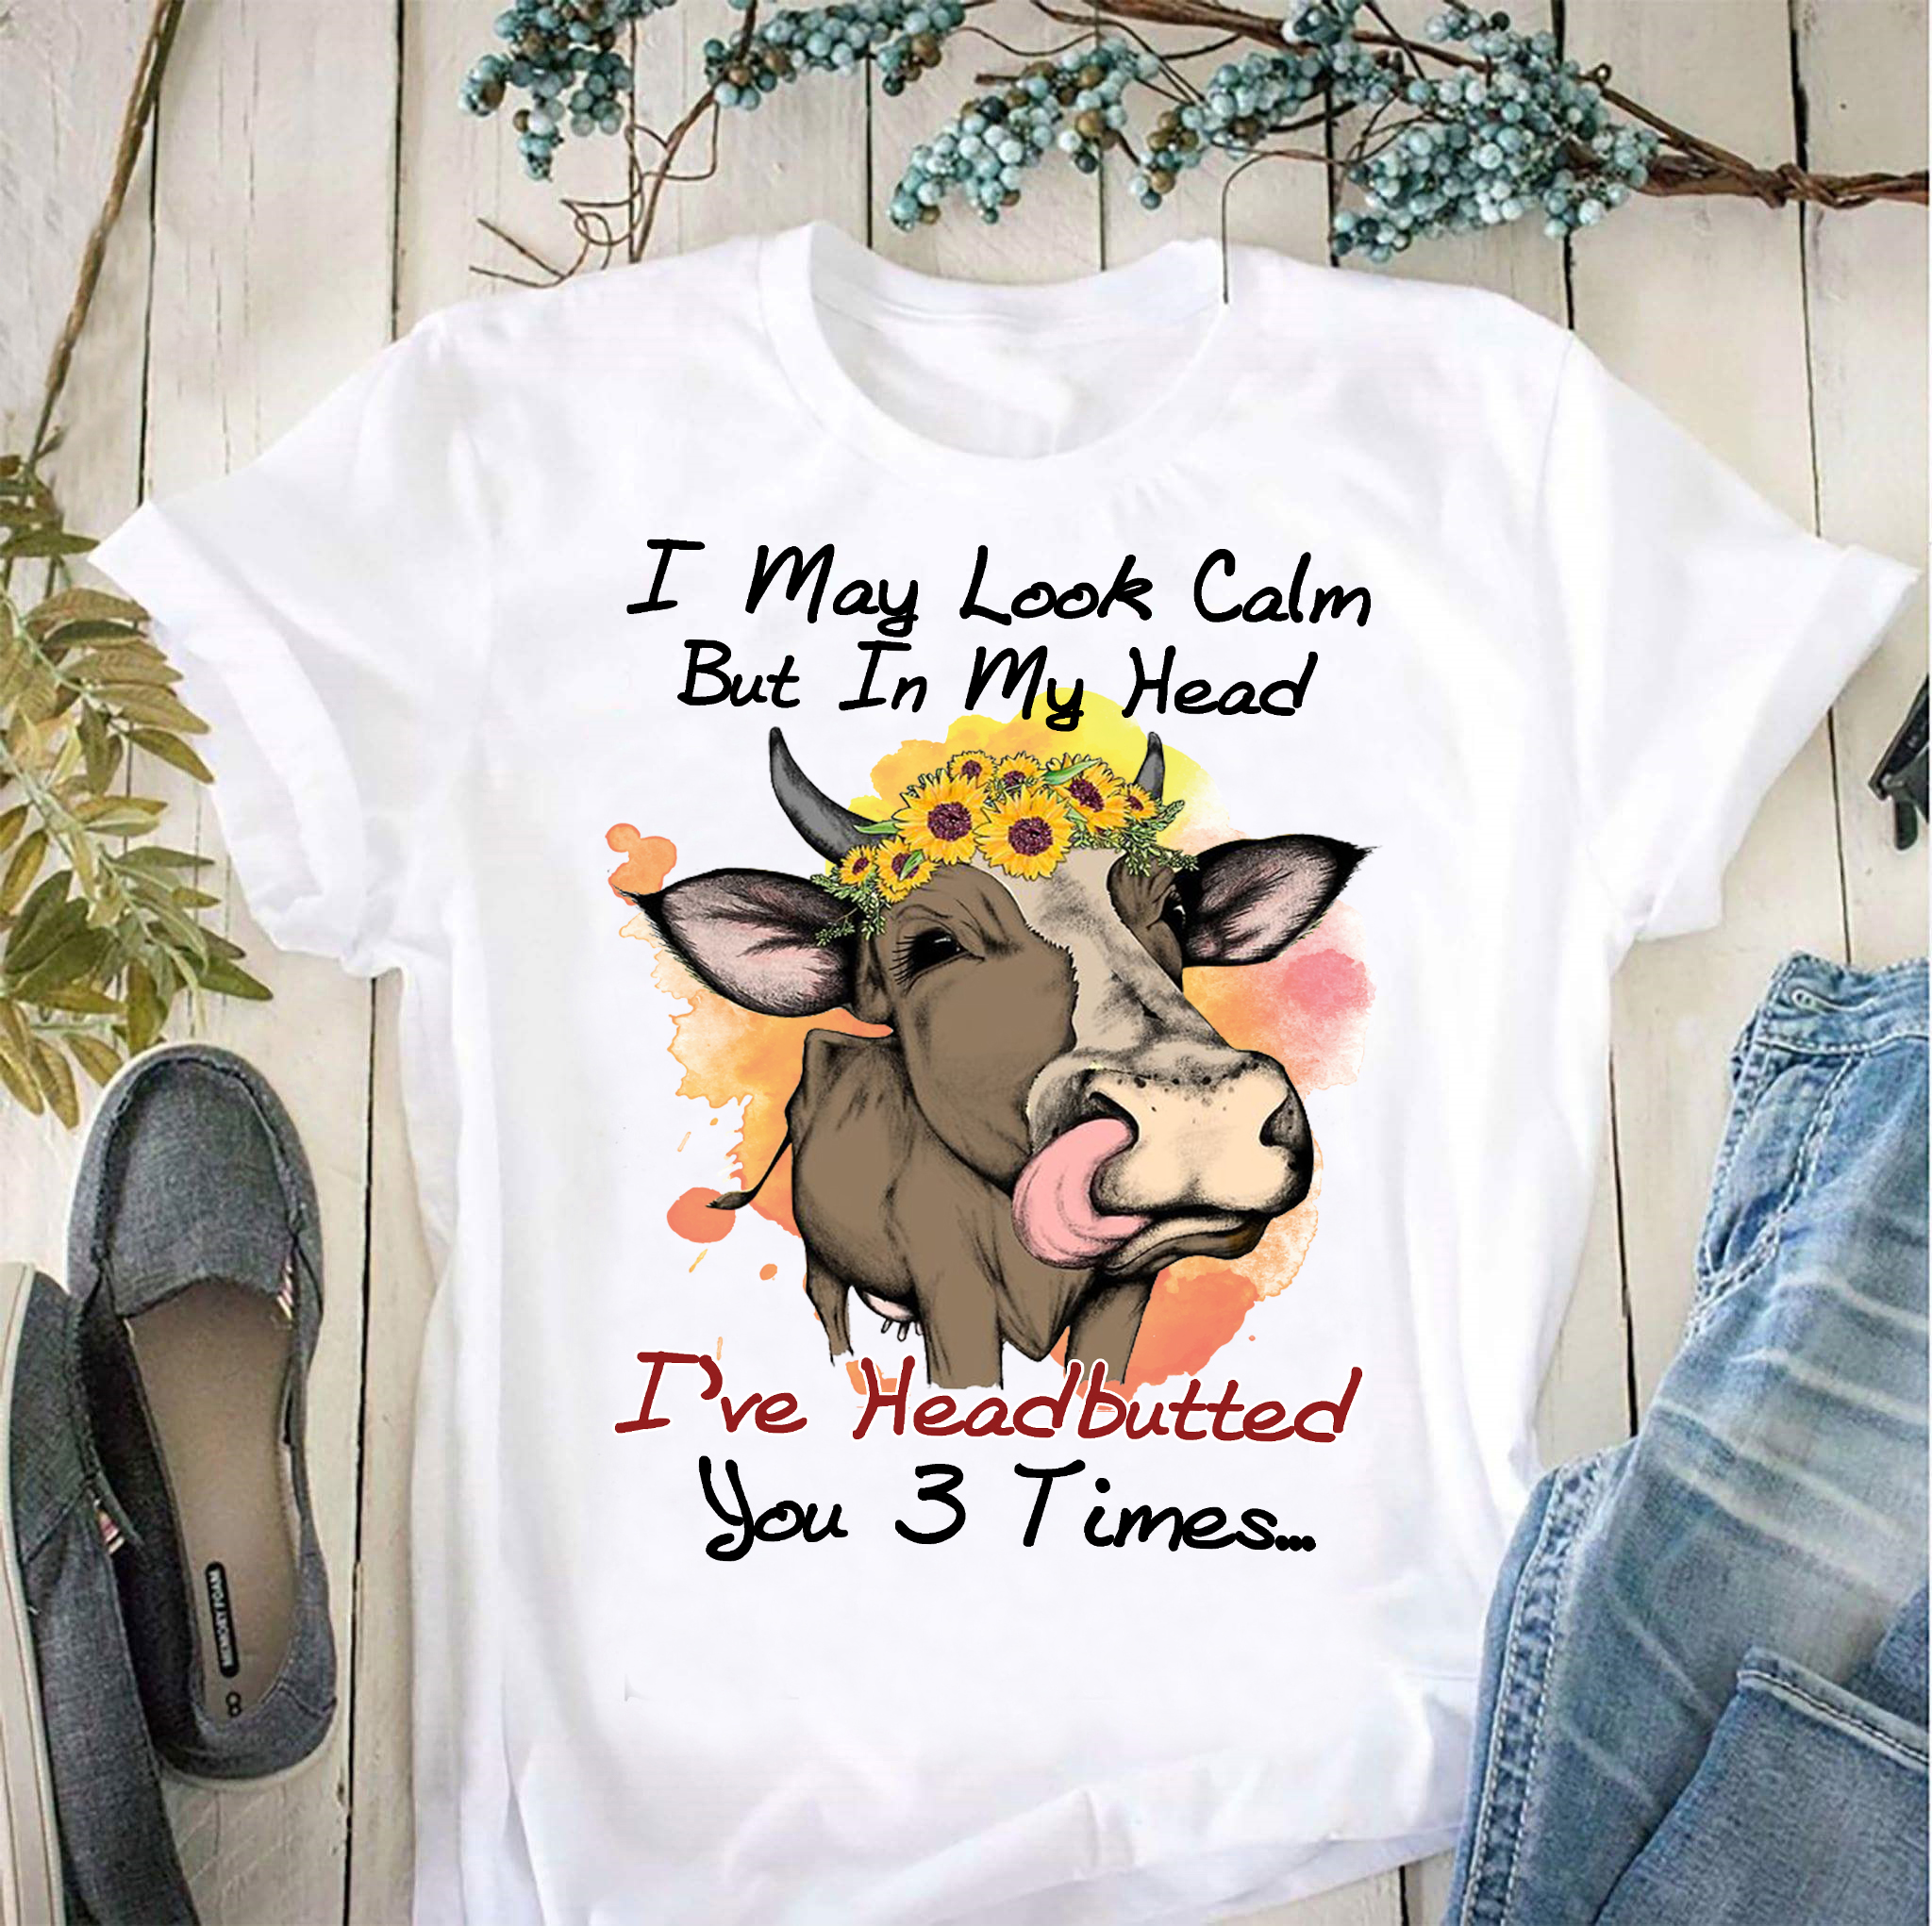 I may look calm but in my head I’ve headbutted you 3 times – Cows